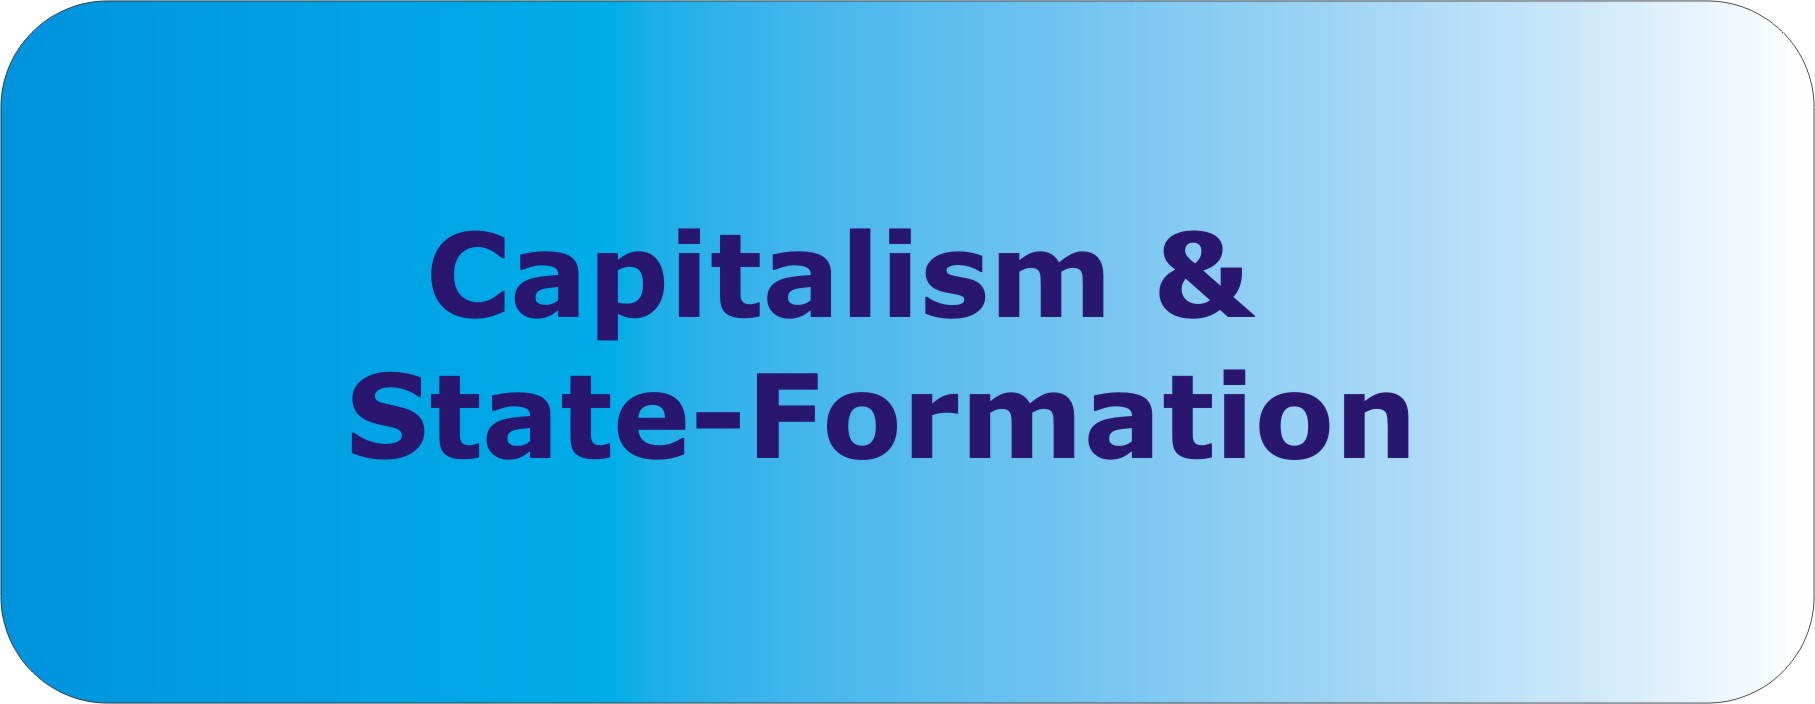 Capitalism and State-Formation